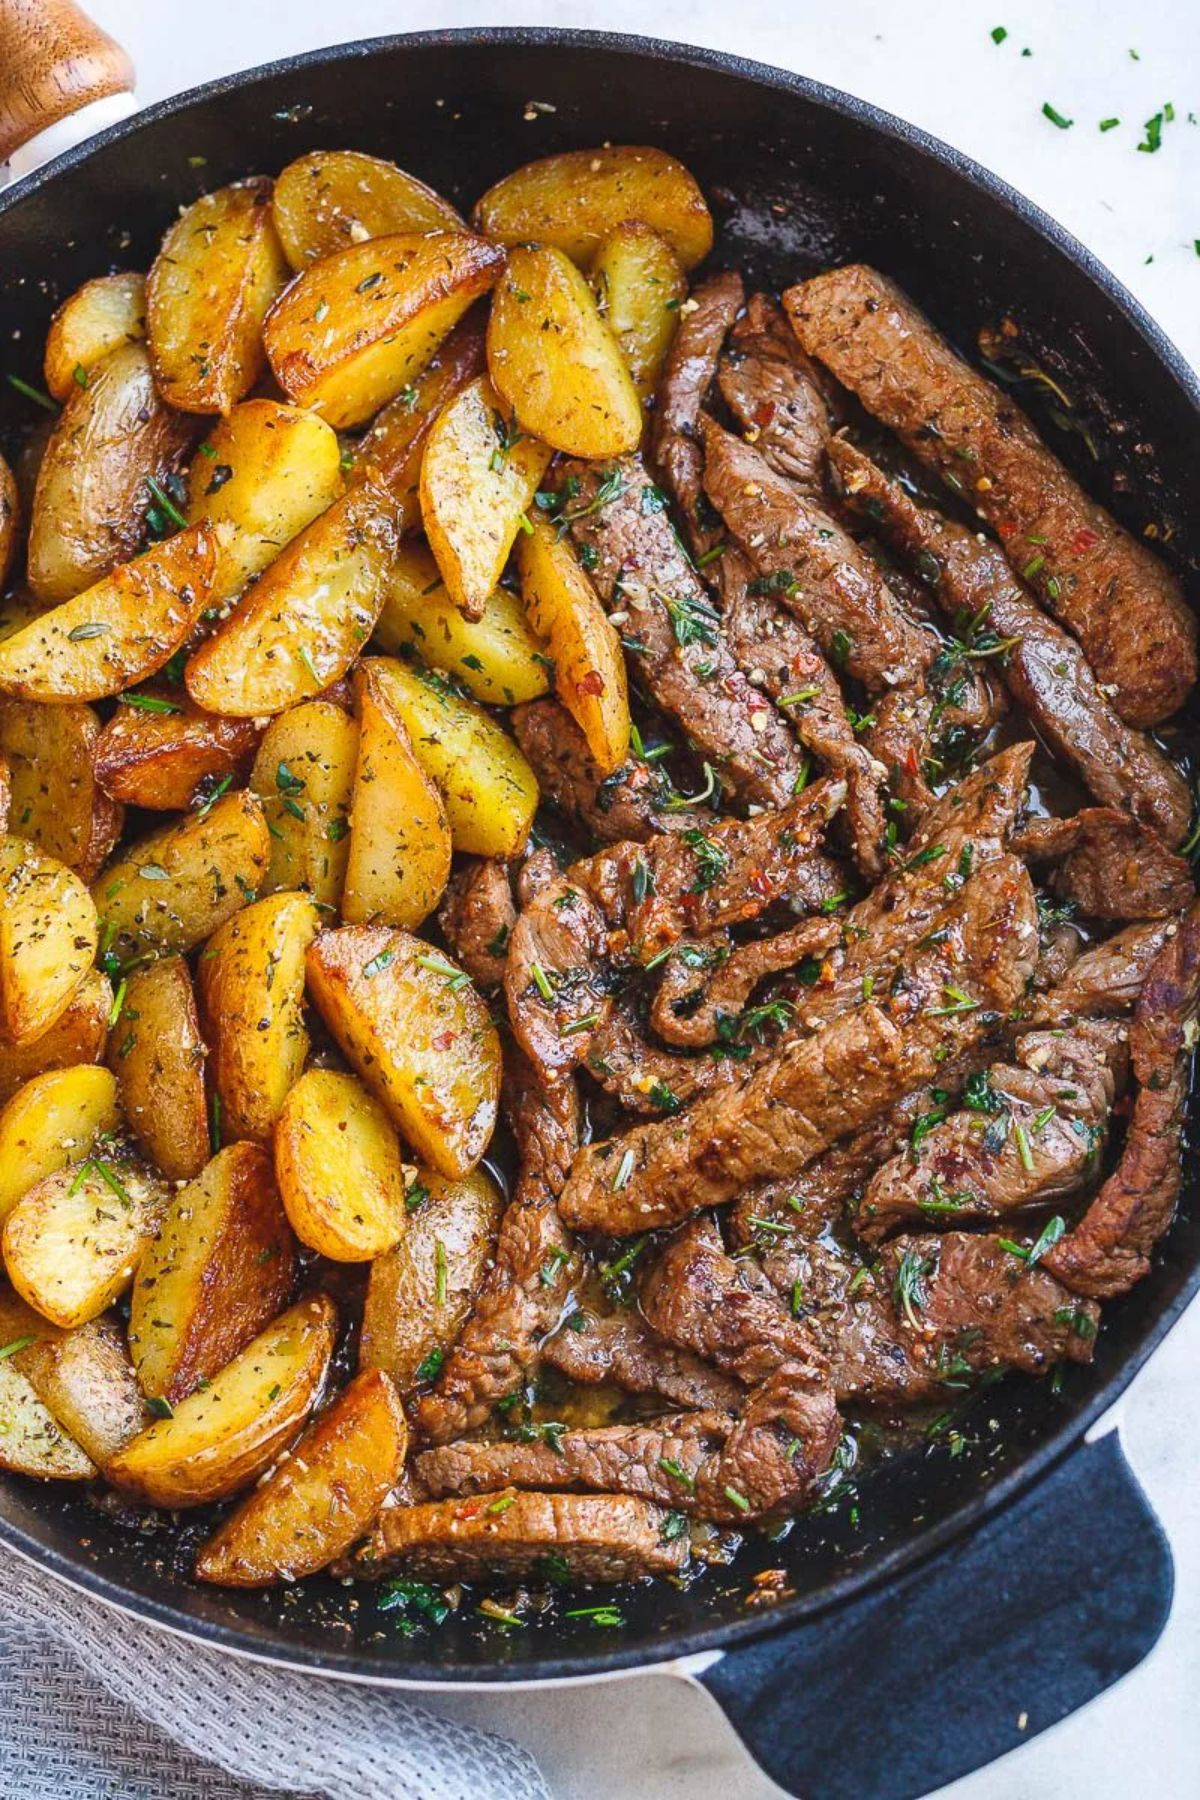 Delicious garlic butter steak and potatoes in a skillet.